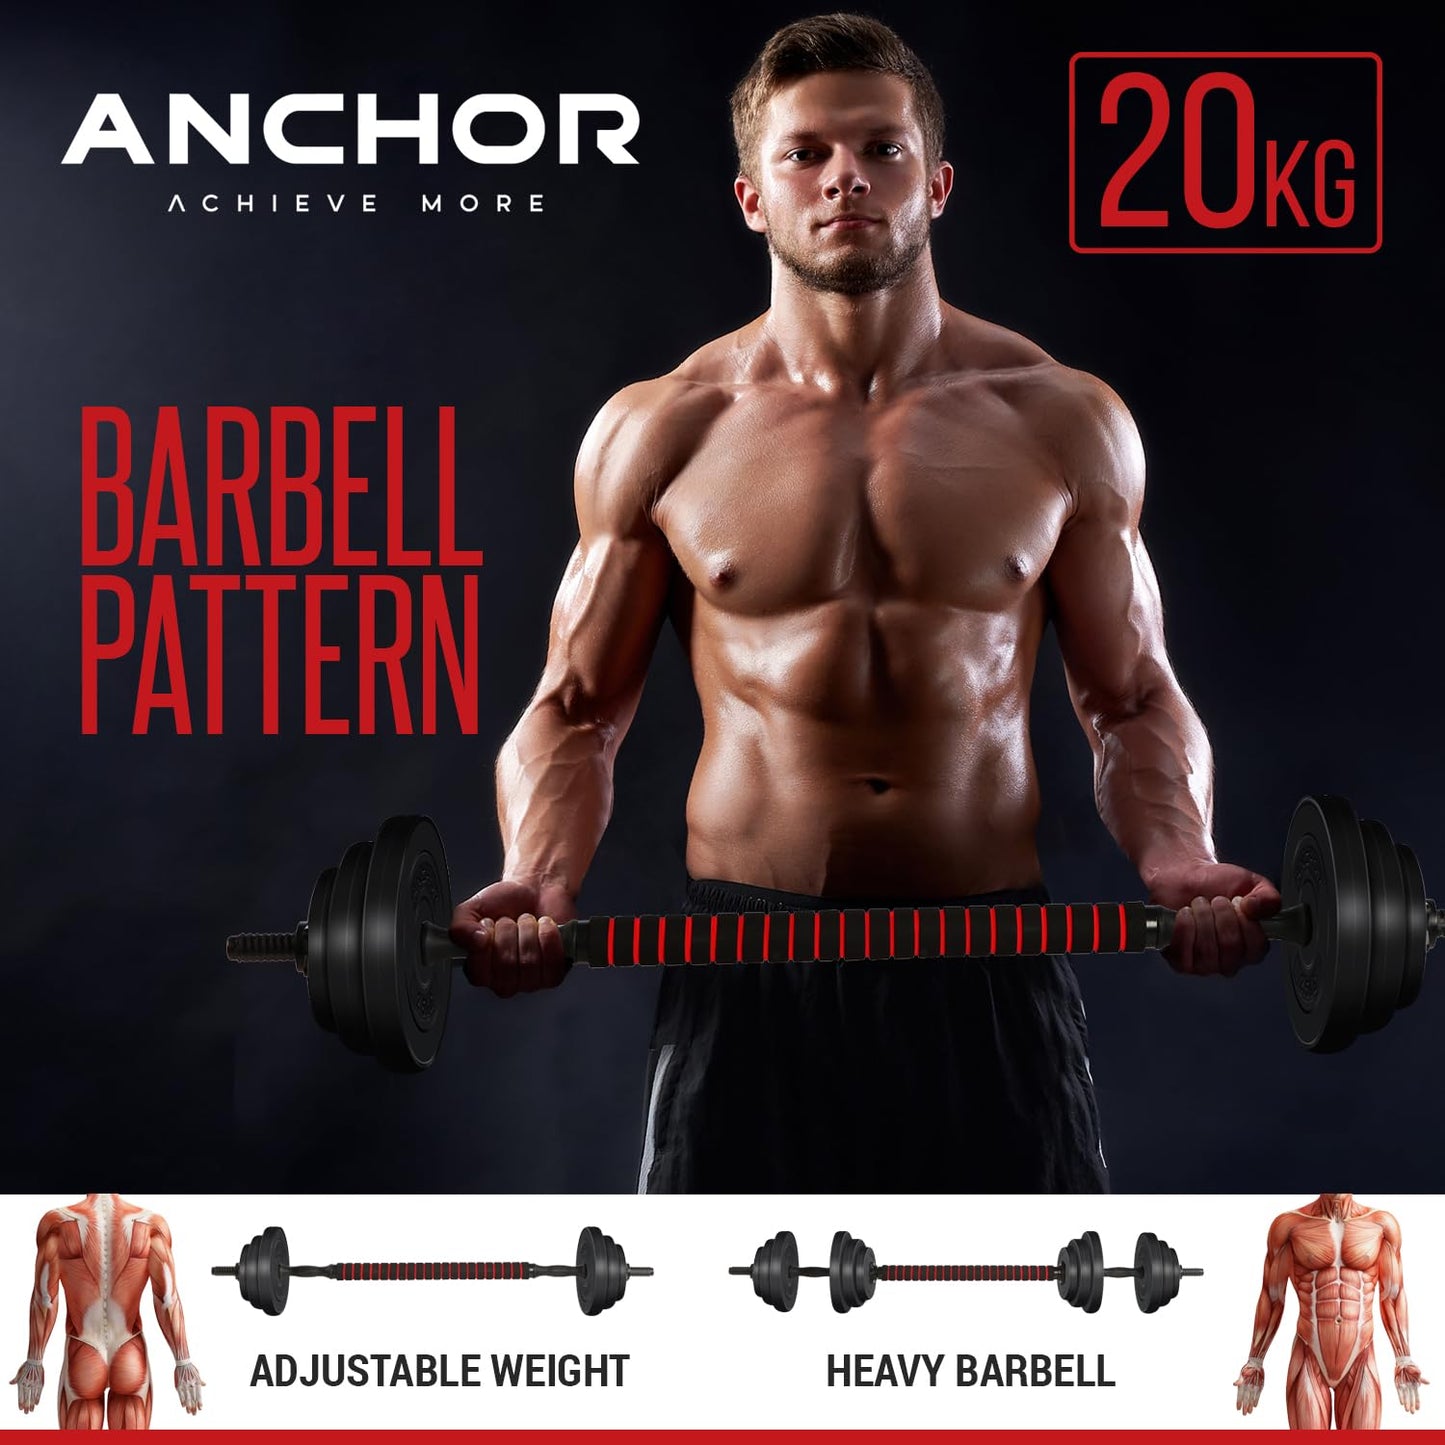 Anchor's Adjustable Dumbbells Weights set for Men Women, Dumbbell hand weight Polyvinyl Chloride Barbell Perfect for Bodybuilding fitness weight lifting training home gym equipment free weights (20)